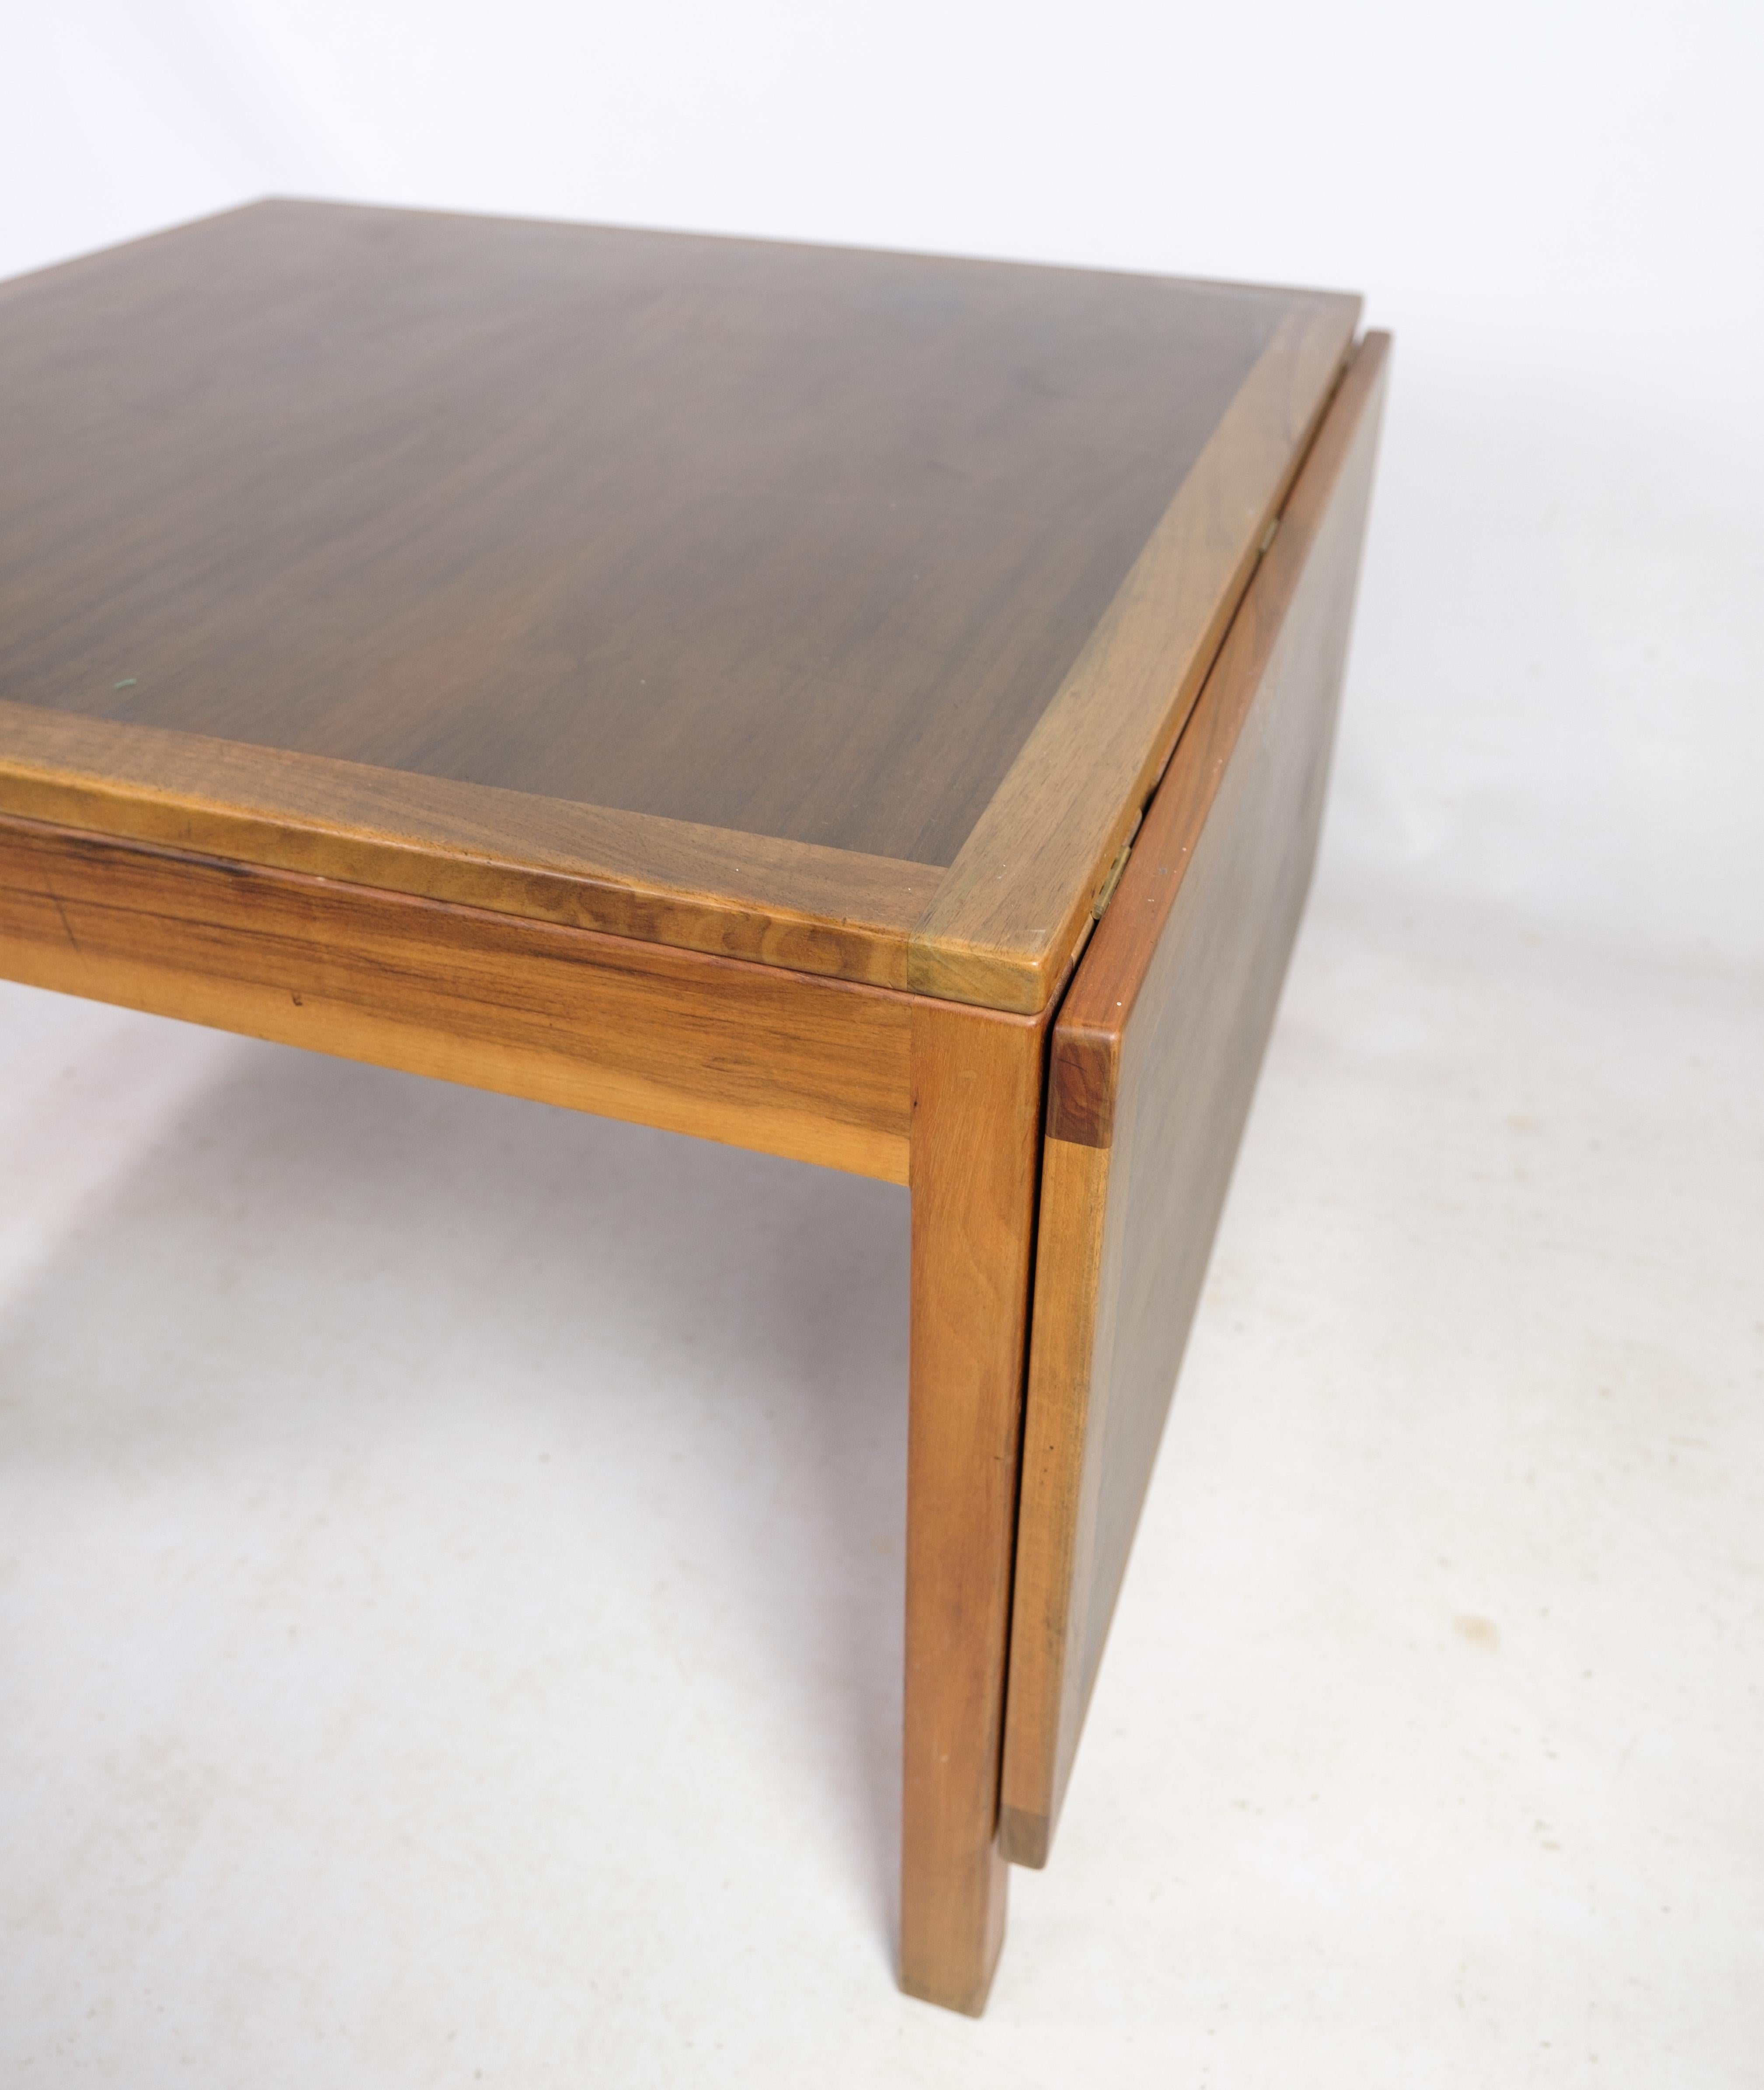 Mid-20th Century Coffee Table, Model 5362 By Børge Mogensen Made By Fredericia Furniture 1960s For Sale